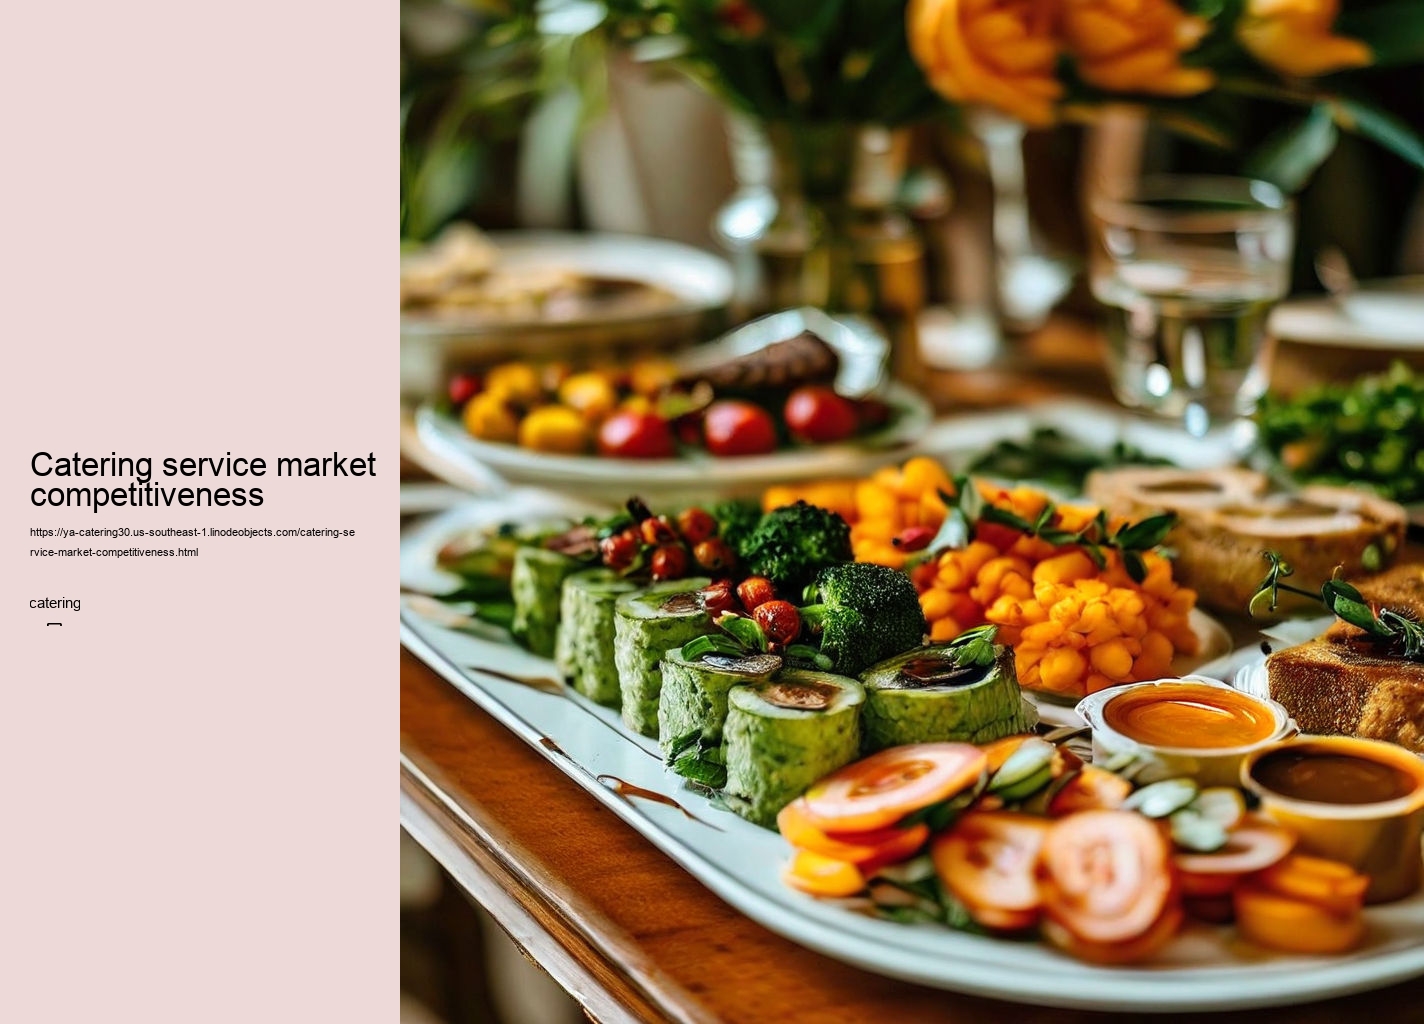 Catering service market competitiveness